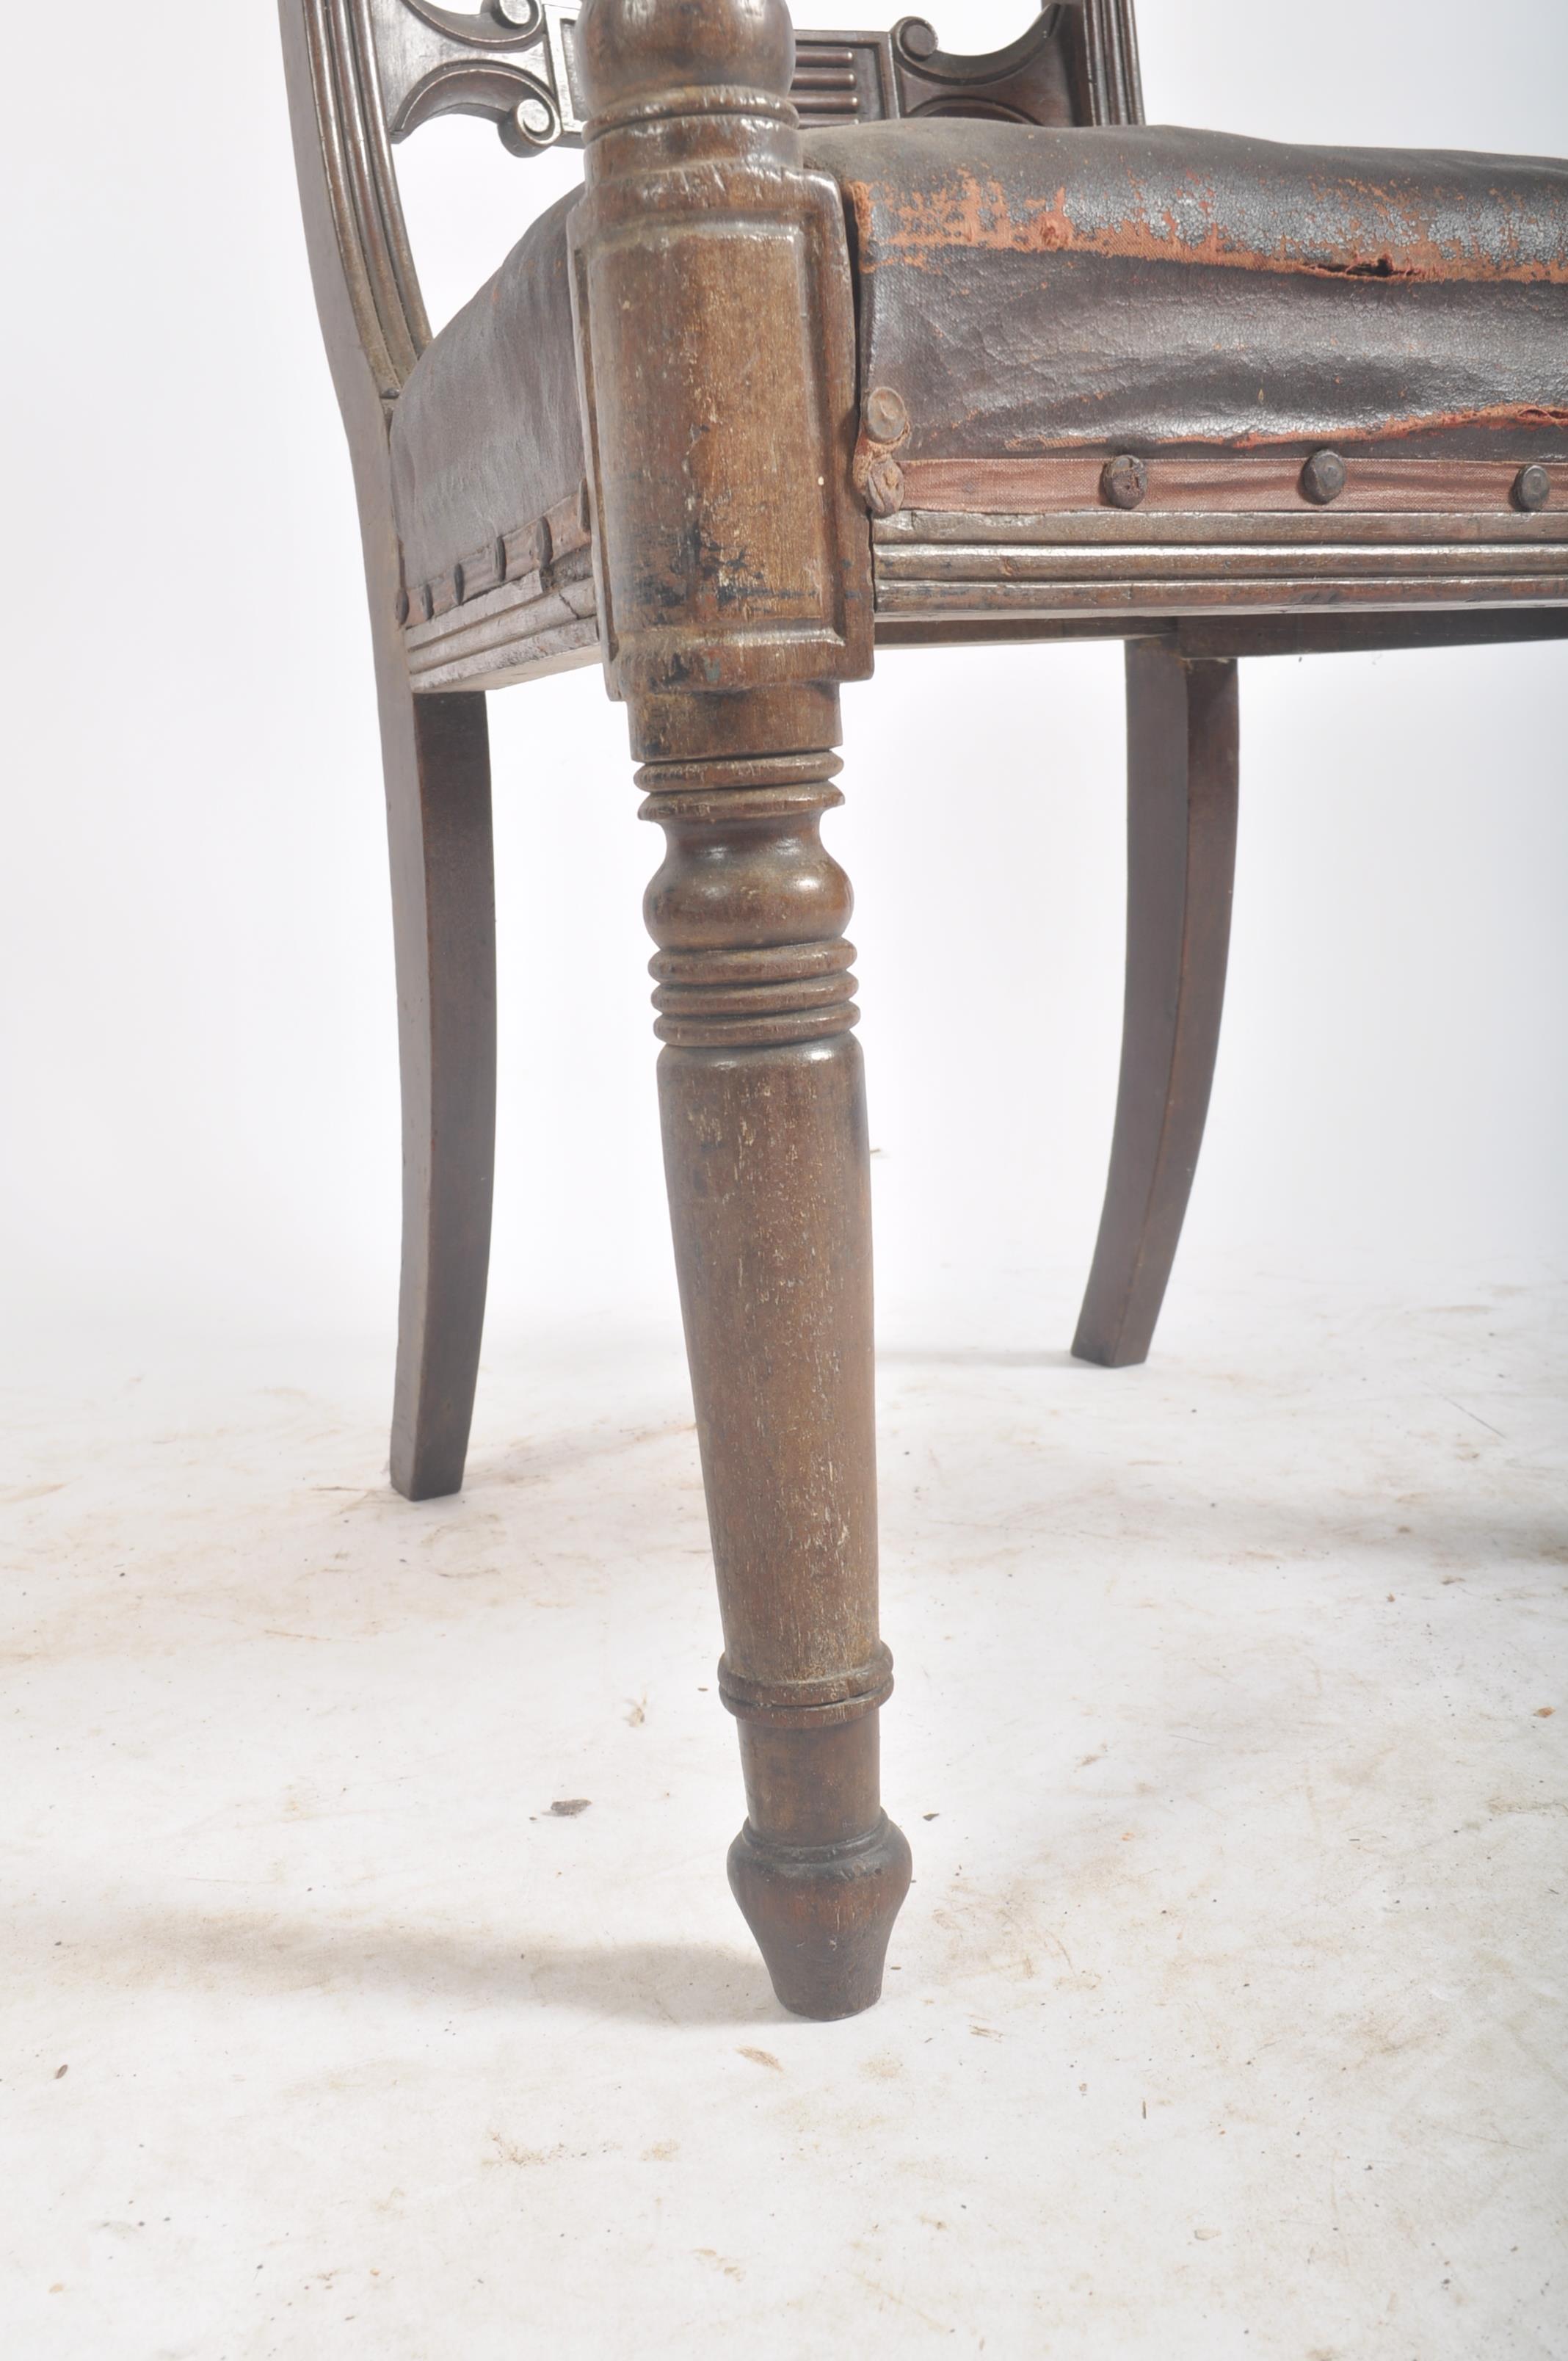 EARLY 19TH REGENCY PERIOD MAHOGANY CARVER DINING CHAIR - Image 2 of 6